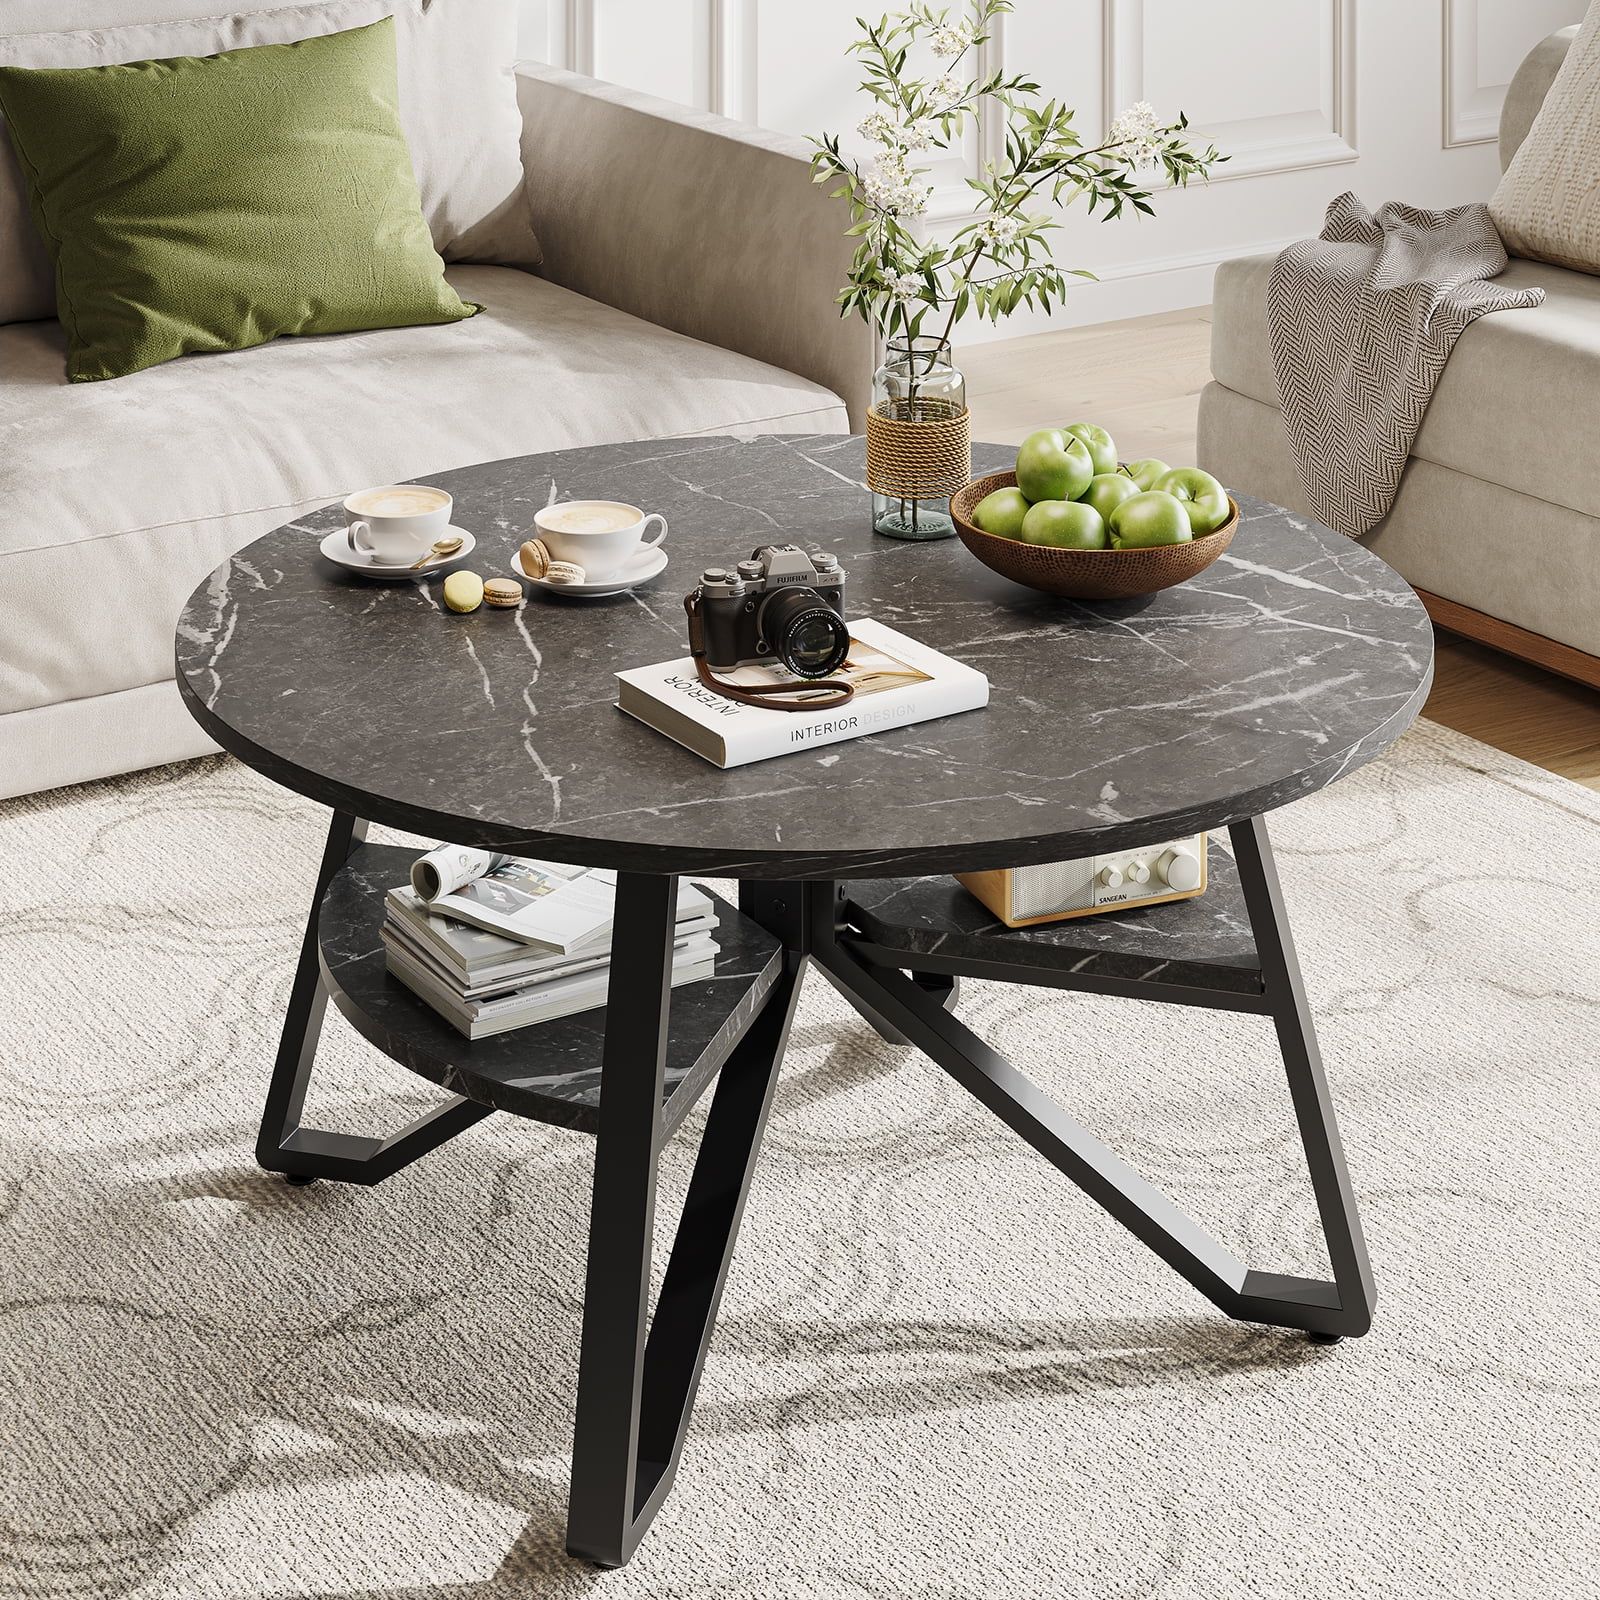 Bestier Round Coffee Table With Storage, Living Room Tables With Sturdy  Metal Legs, Retro Grey Oak – Walmart Inside Round Coffee Tables With Steel Frames (Photo 4 of 15)